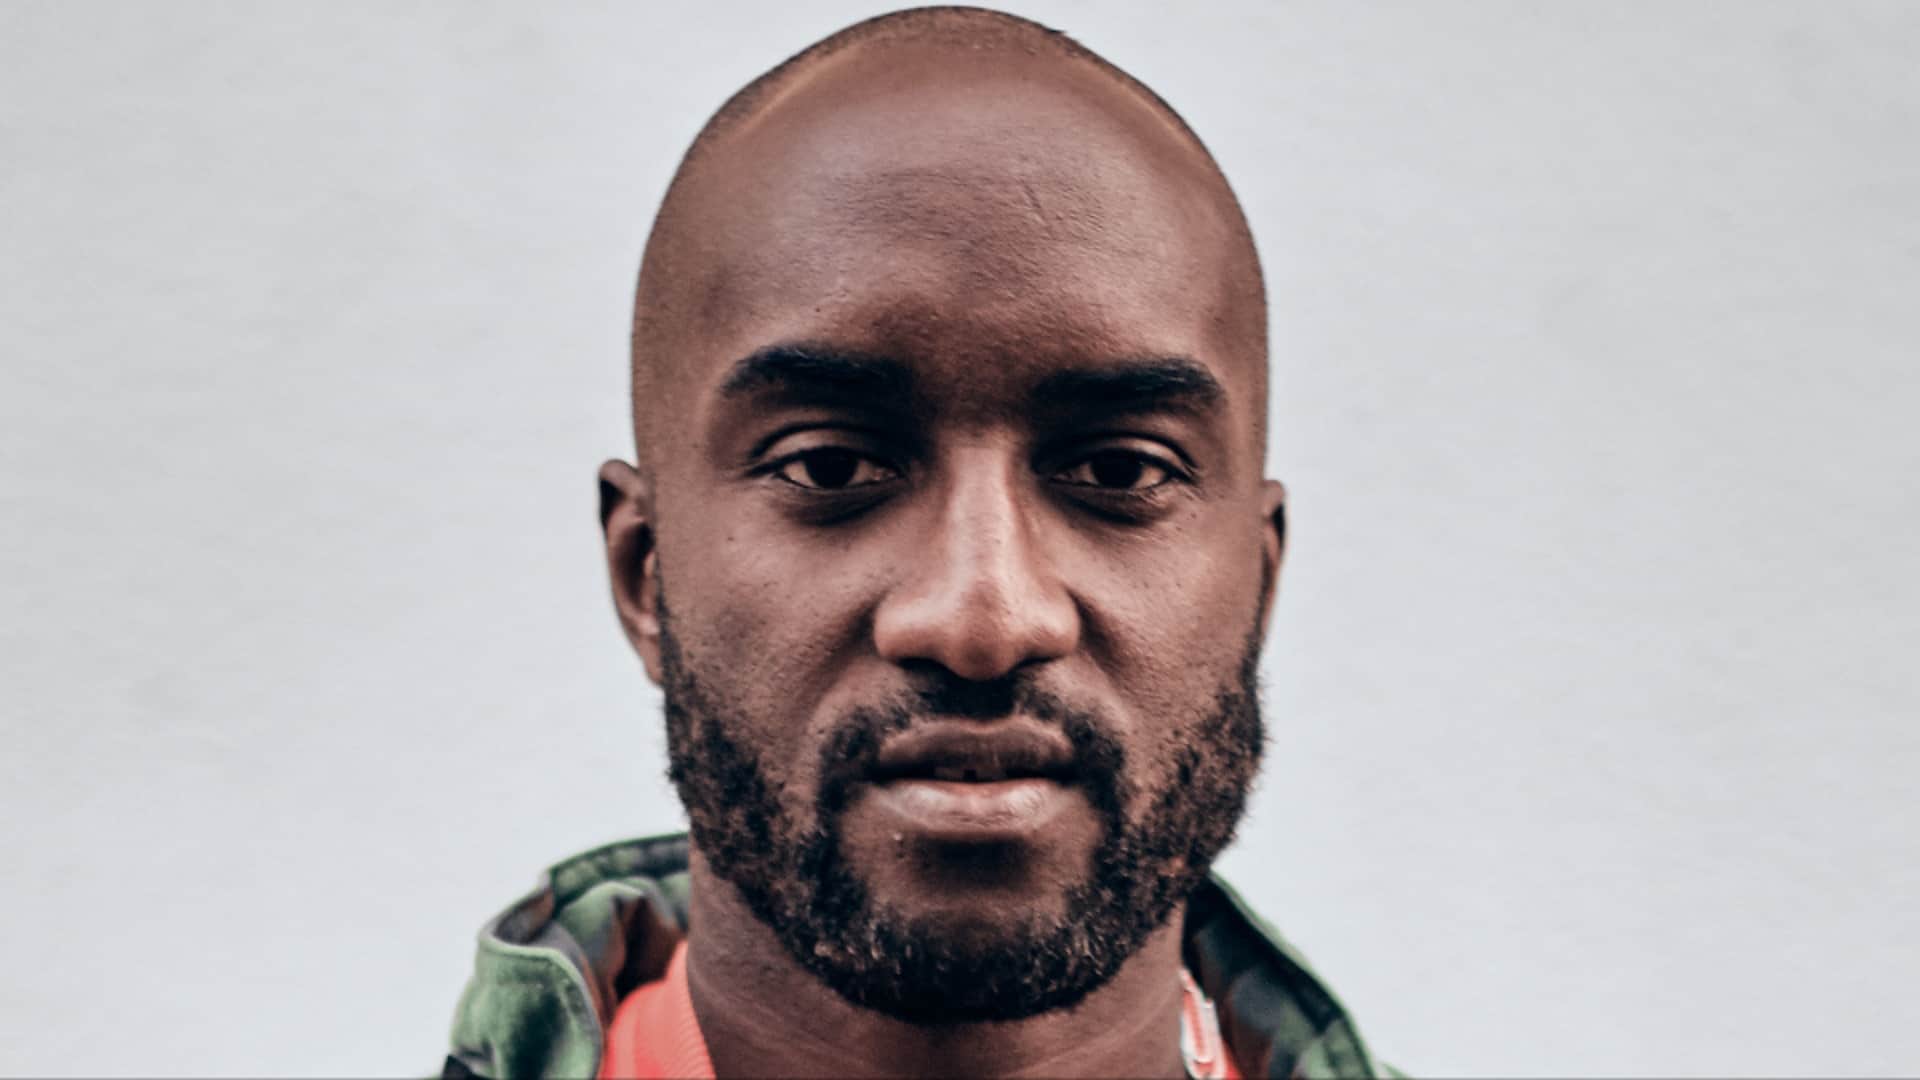 Virgil Abloh set to be honoured by Brooklyn Museum through an exhibit